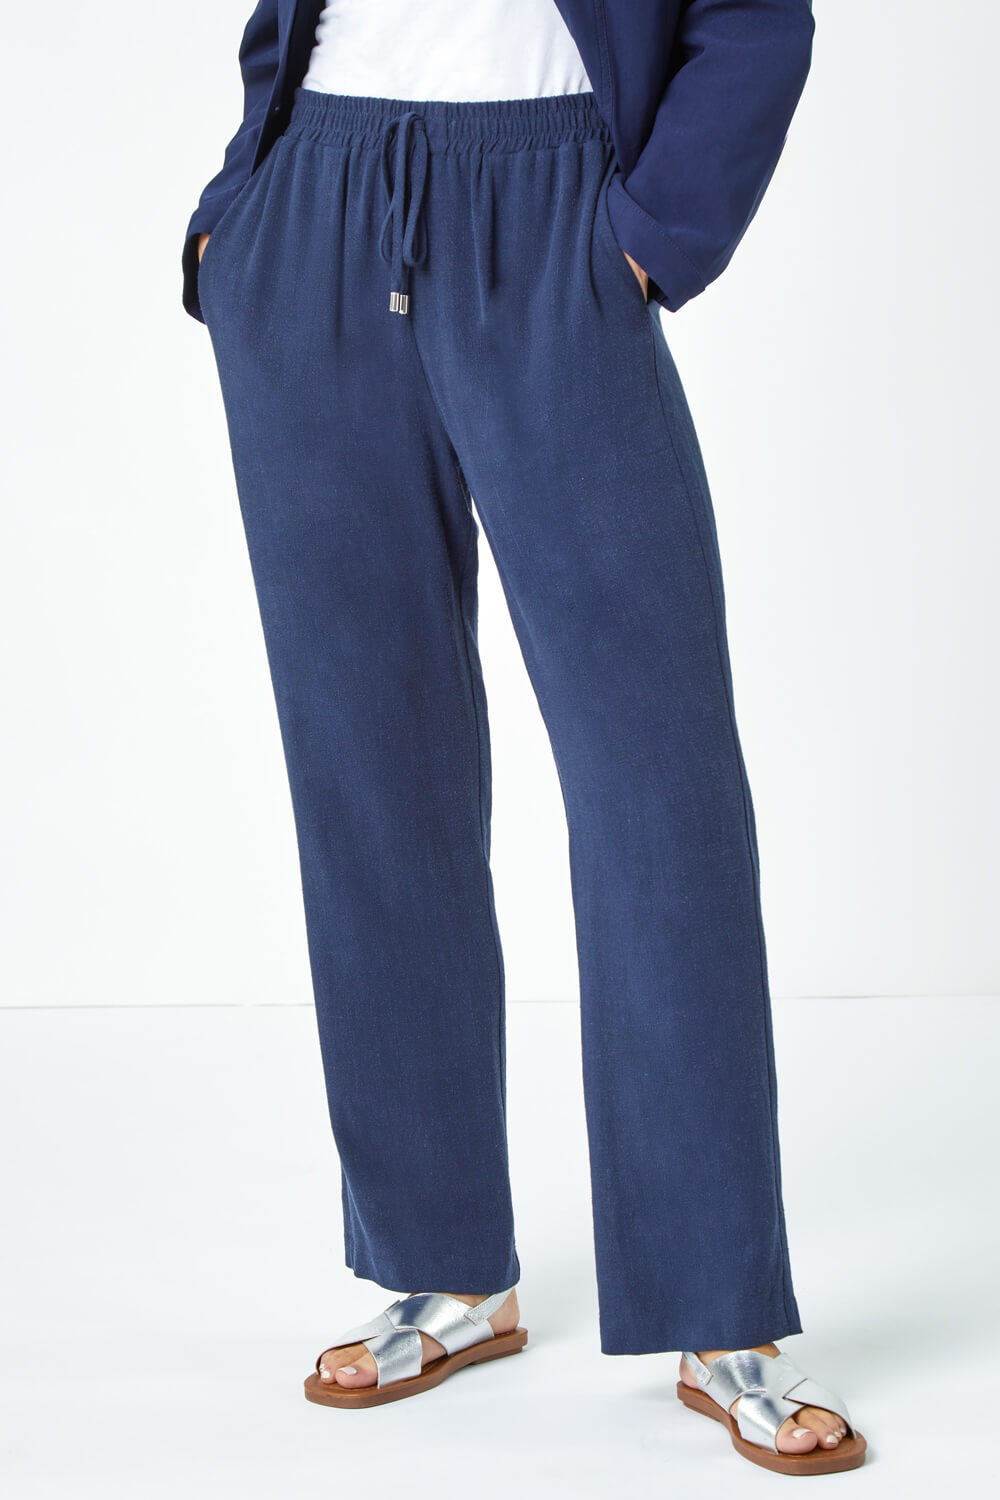 Navy  Petite Linen Mix Trousers, Image 4 of 5